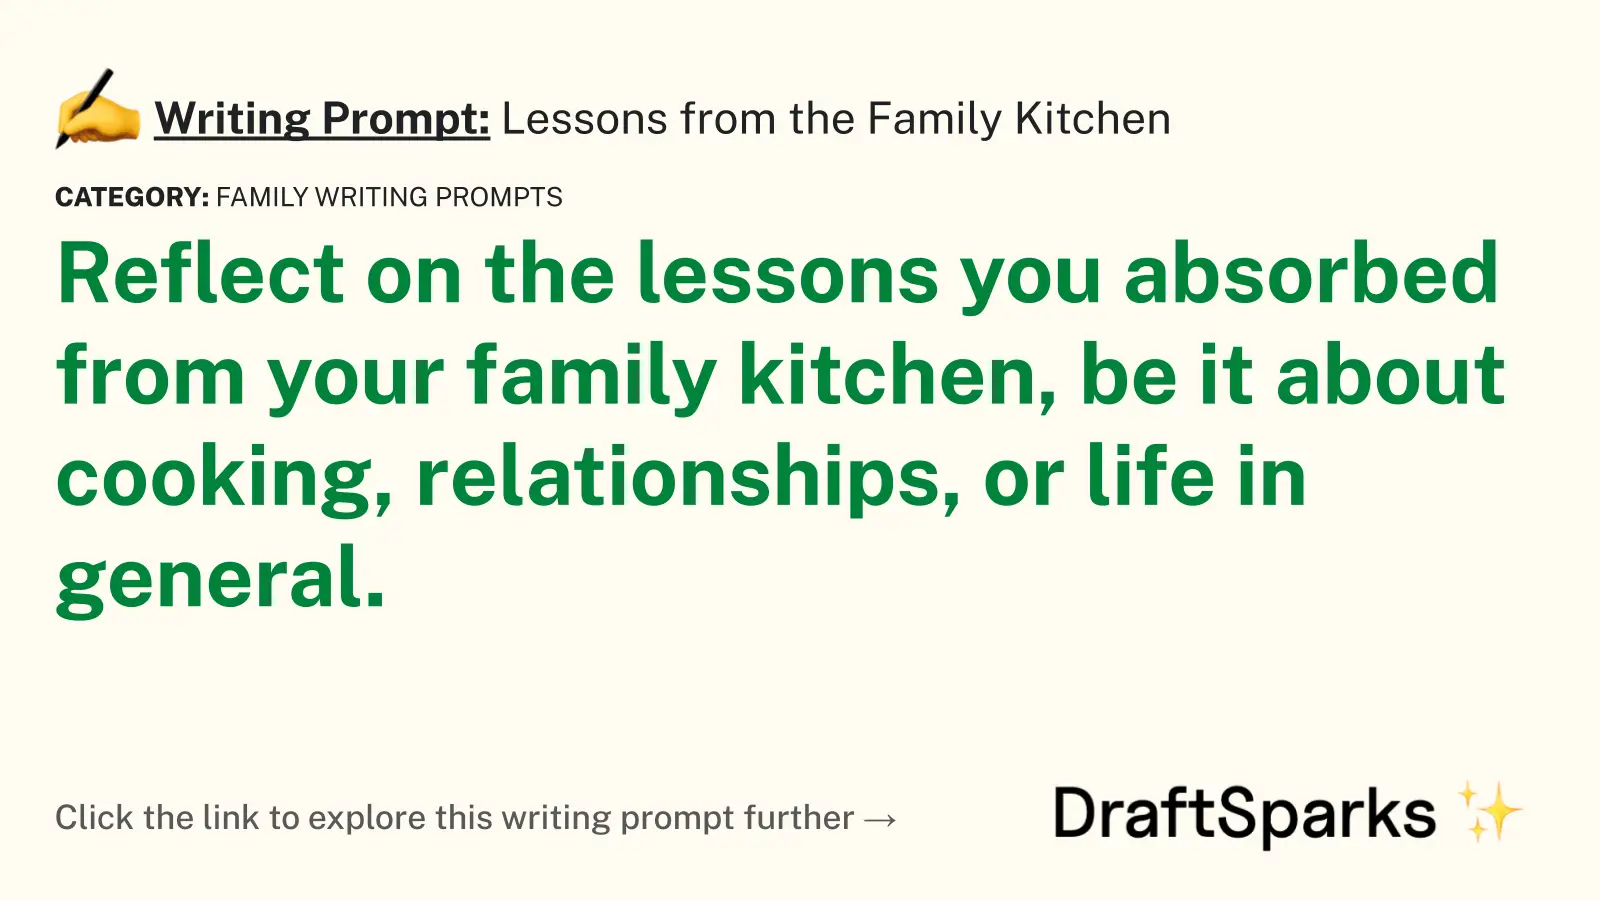 Lessons from the Family Kitchen